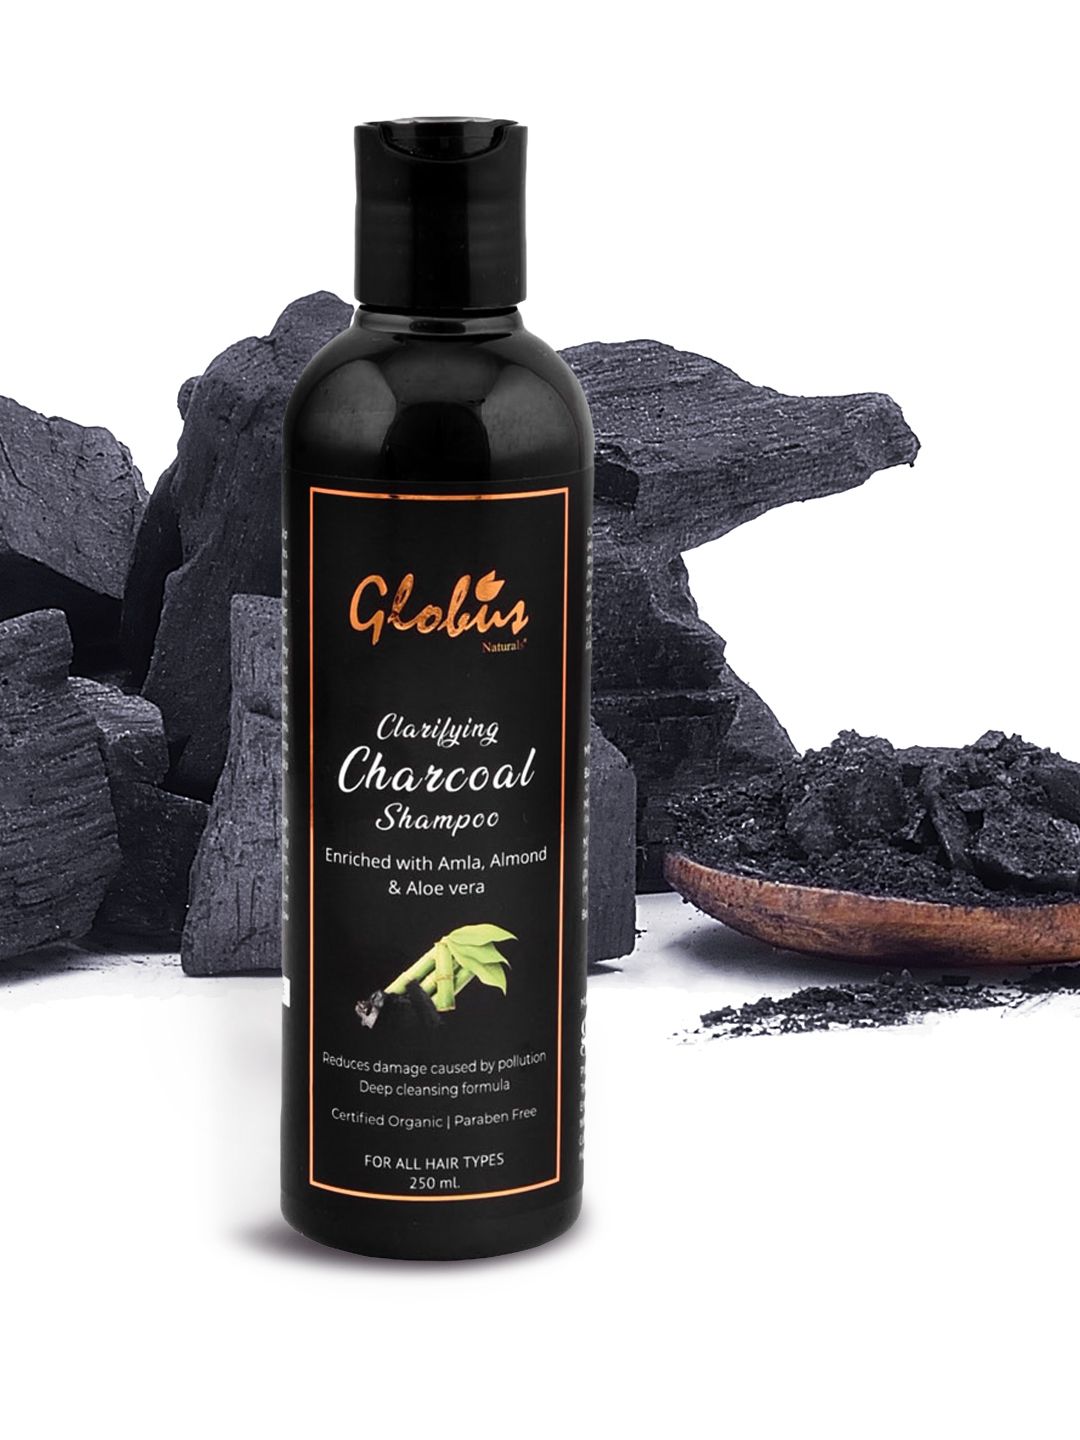 Globus Naturals Clarifying Charcoal Shampoo 250 ml Price in India